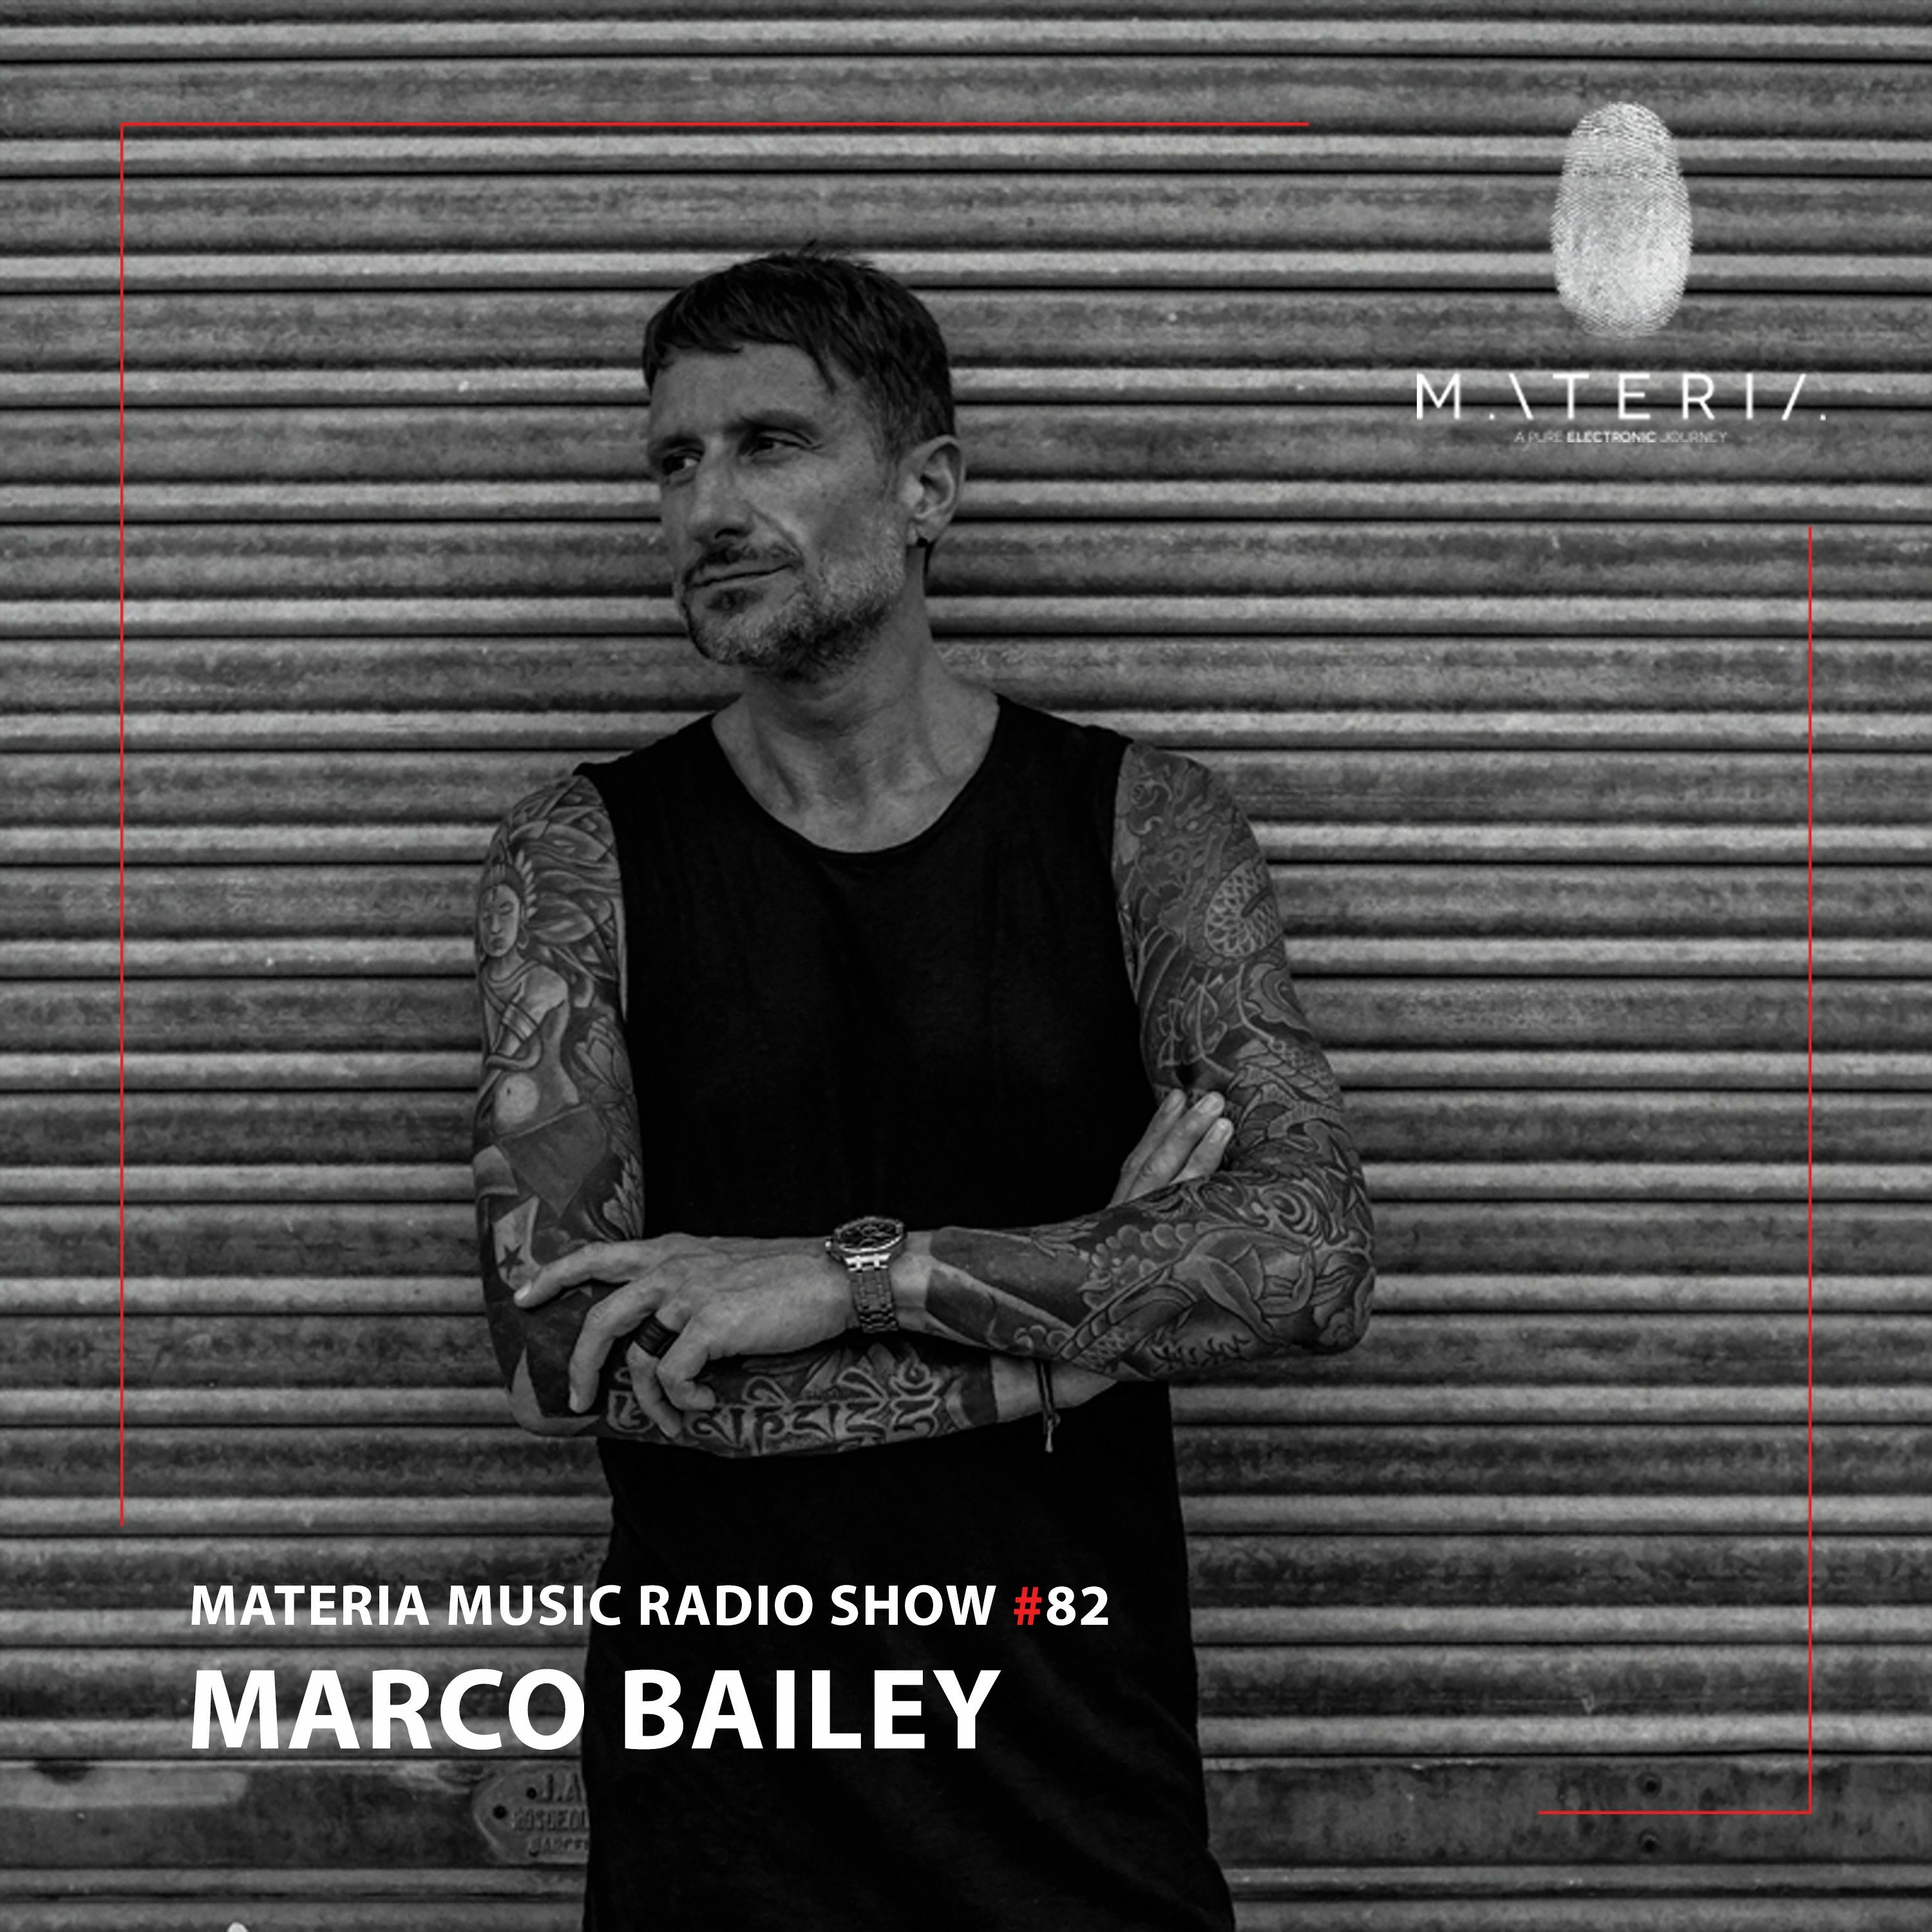 MATERIA Music Radio Show 082 with Marco Bailey